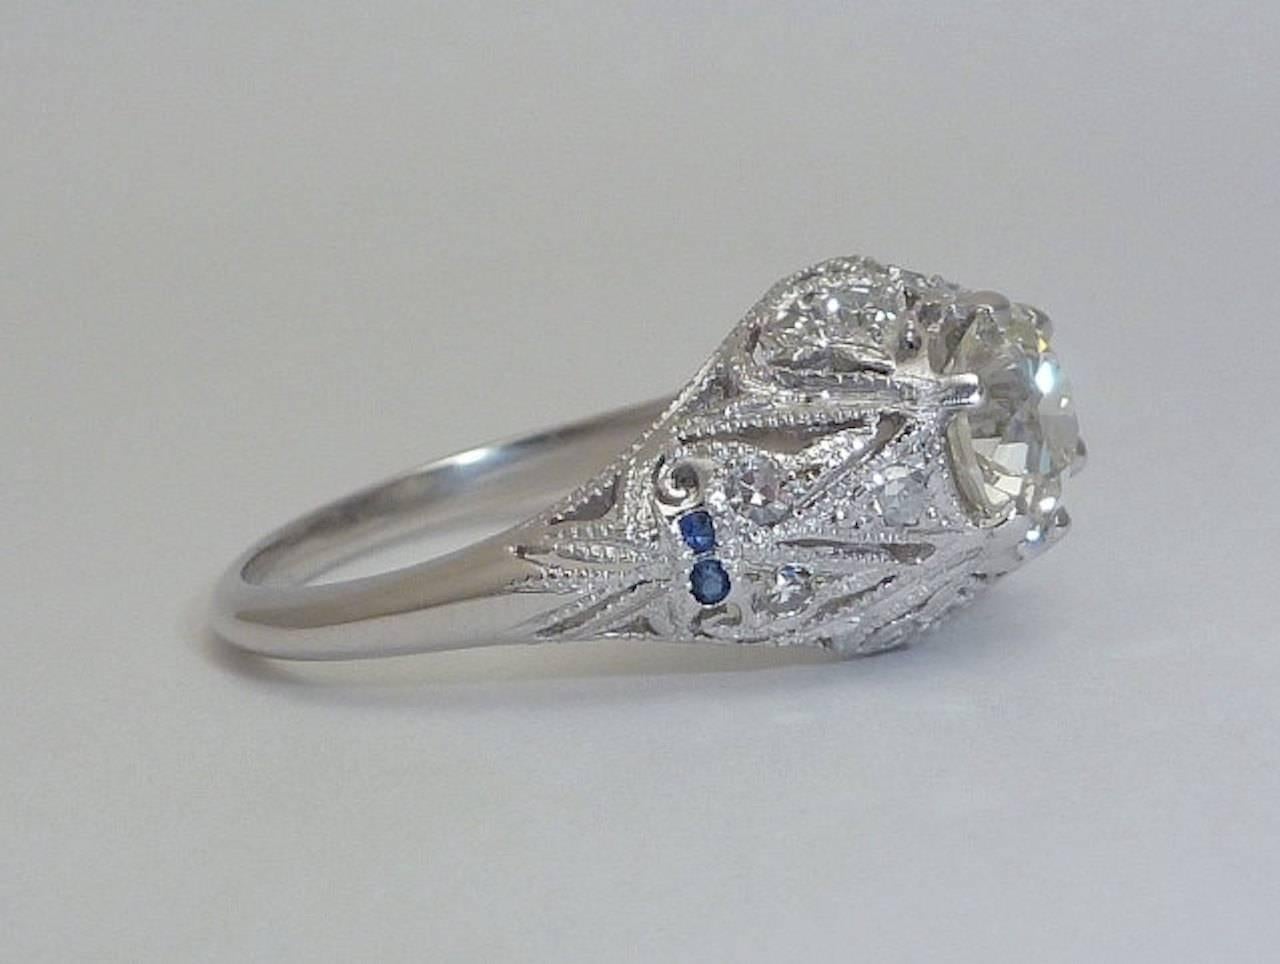 A stunning vintage Diamond and Sapphire engagement ring in luxurious platinum. Beautifully detailed this ring features incredible elaborate hand pierced filigree work, and mille grain beading~all completely hand done by a true master.

Centering